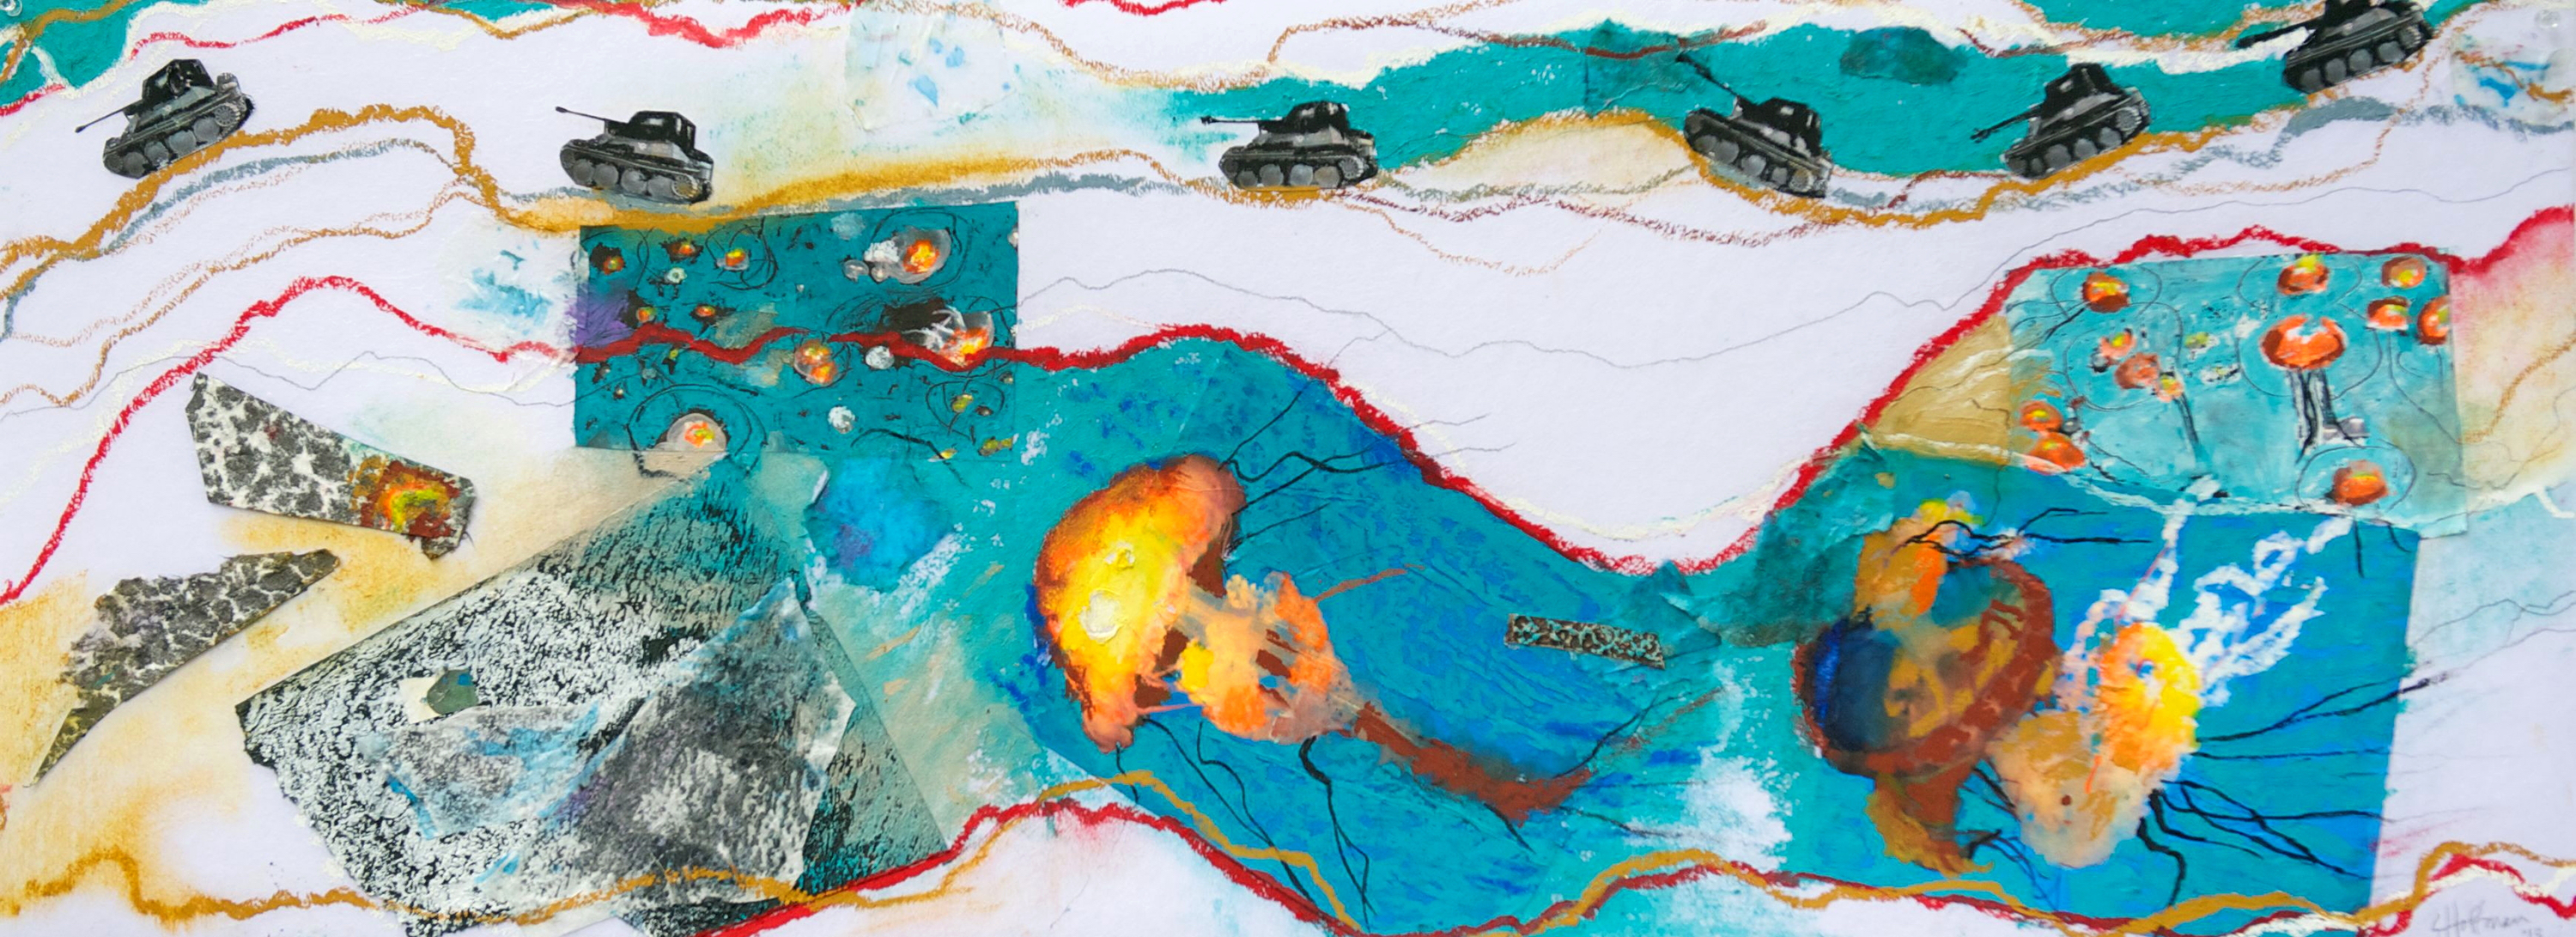 "Water Wars #2" mixed media work by Susan Hoffman Fishman, courtesy of the artist.